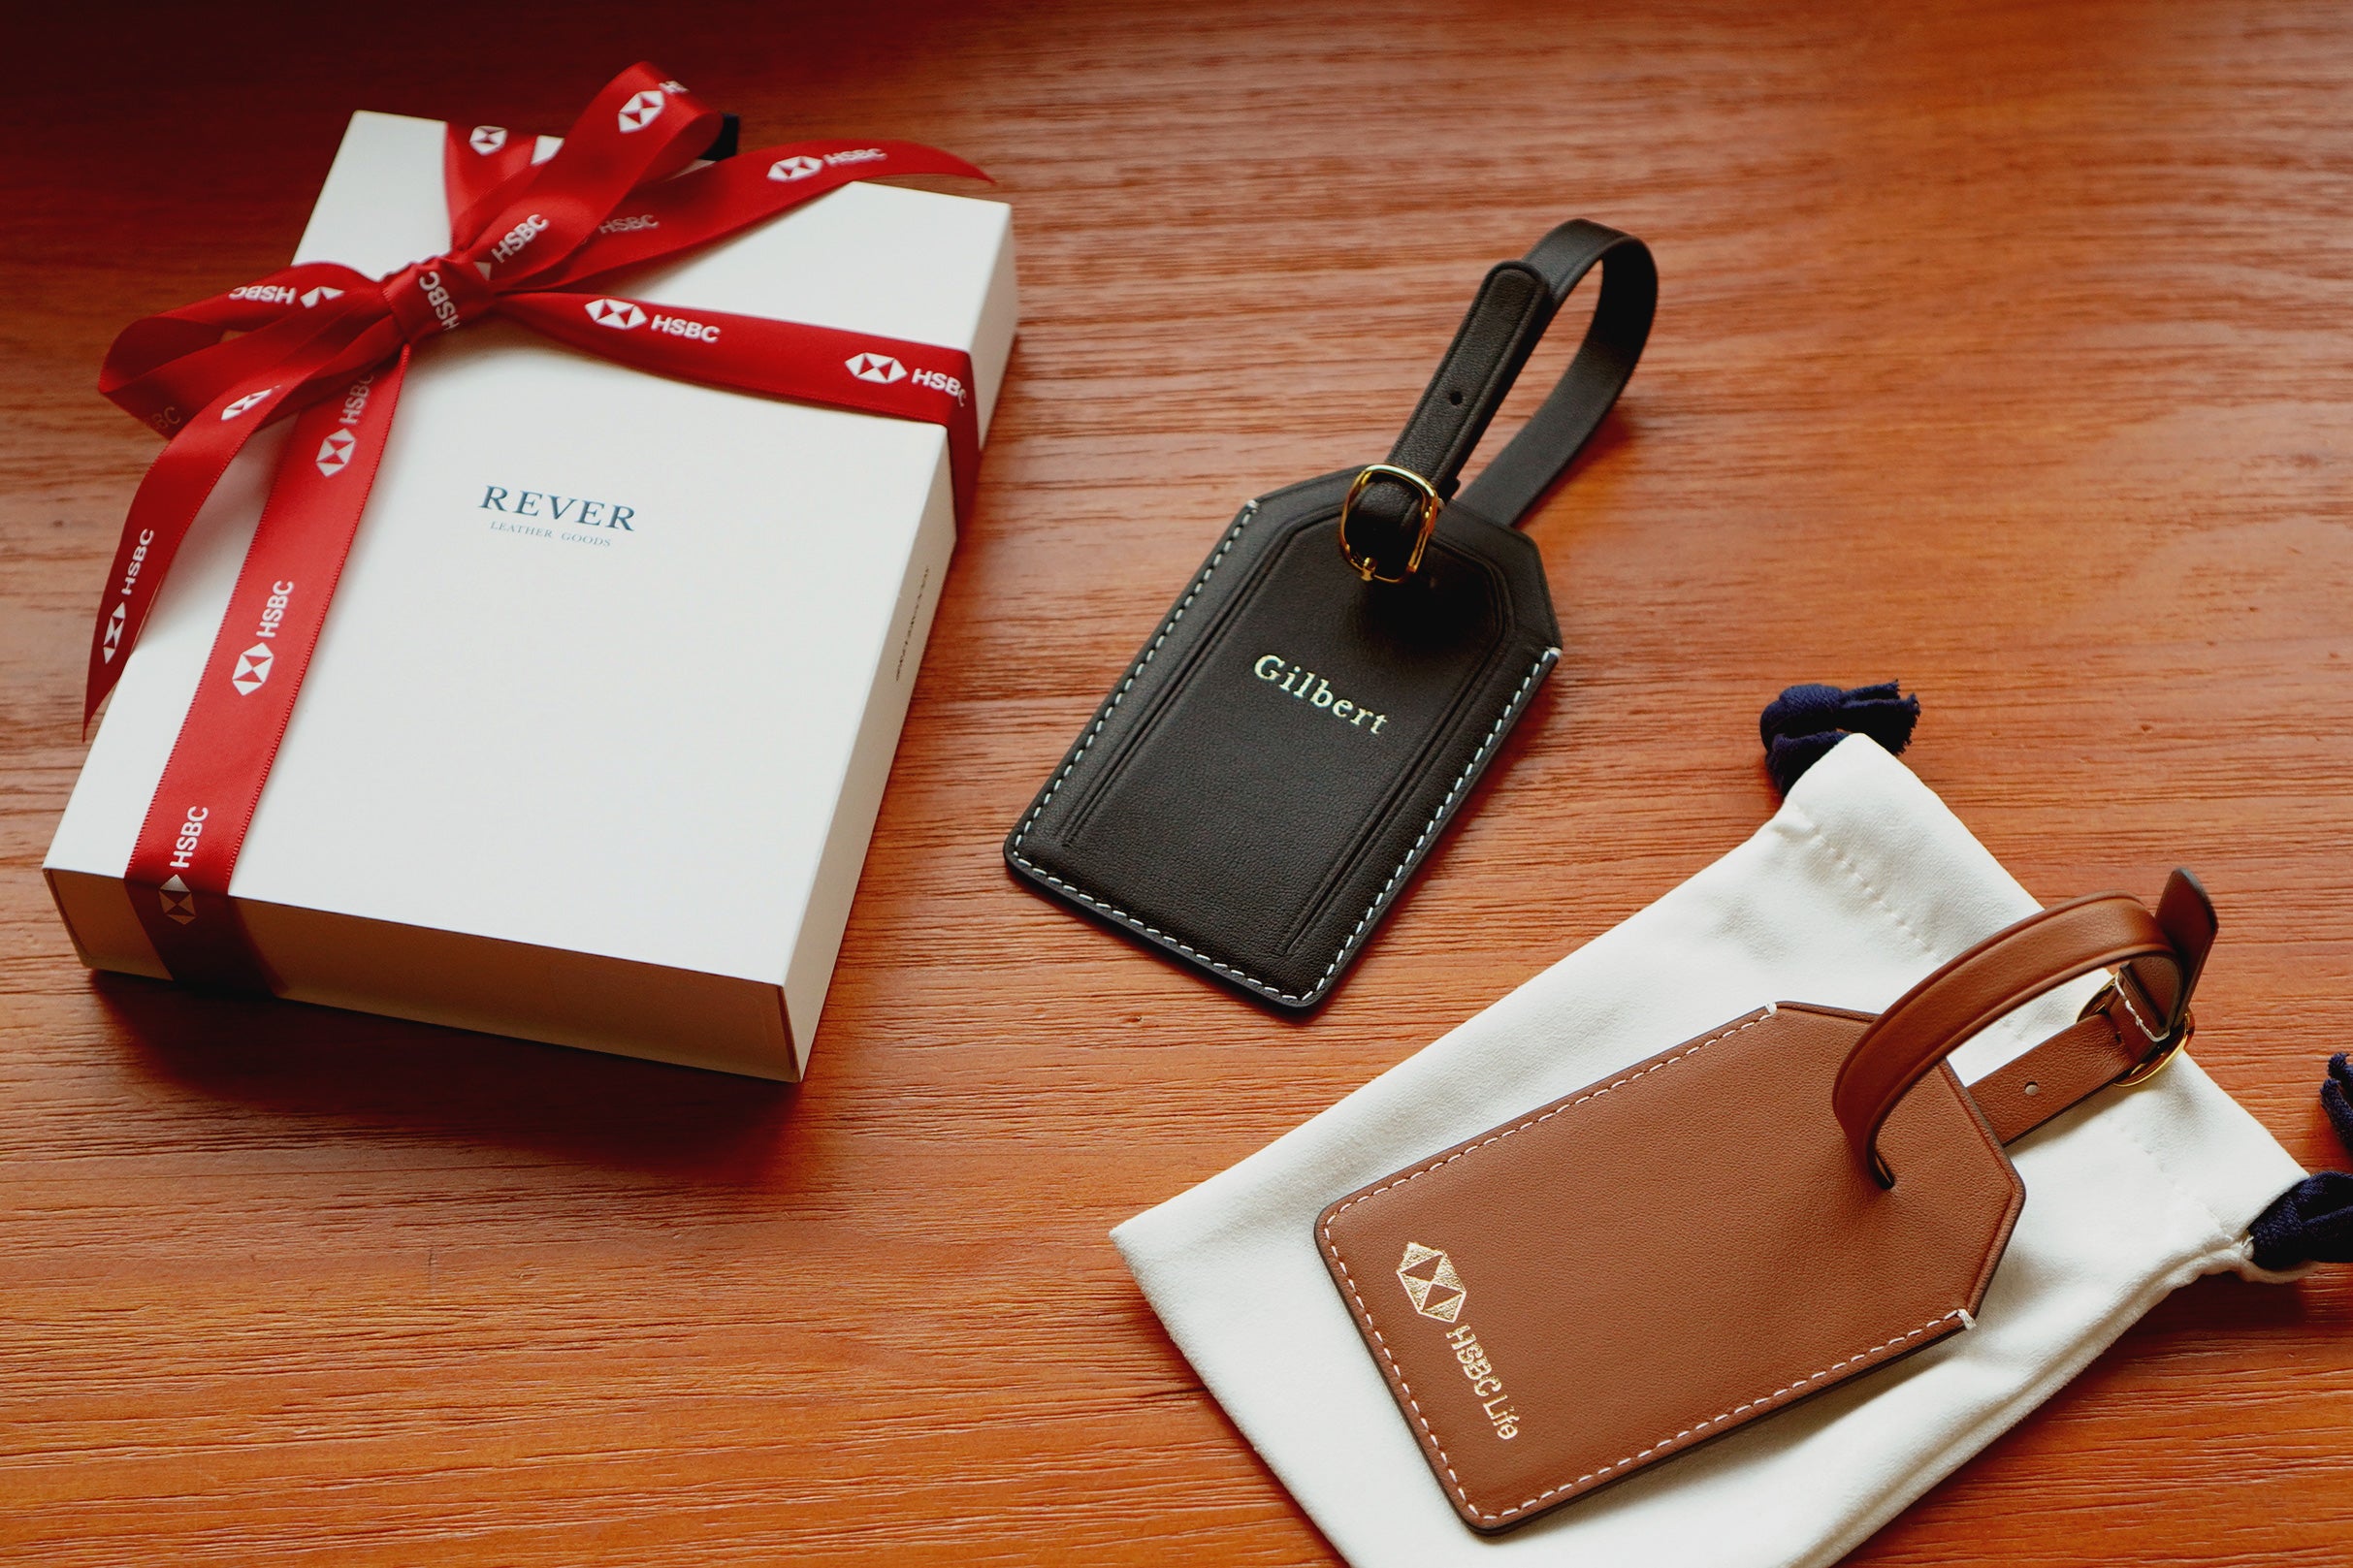 Rever personalised leather luggage tags, custom made as corporate gifts for HSBC Bank